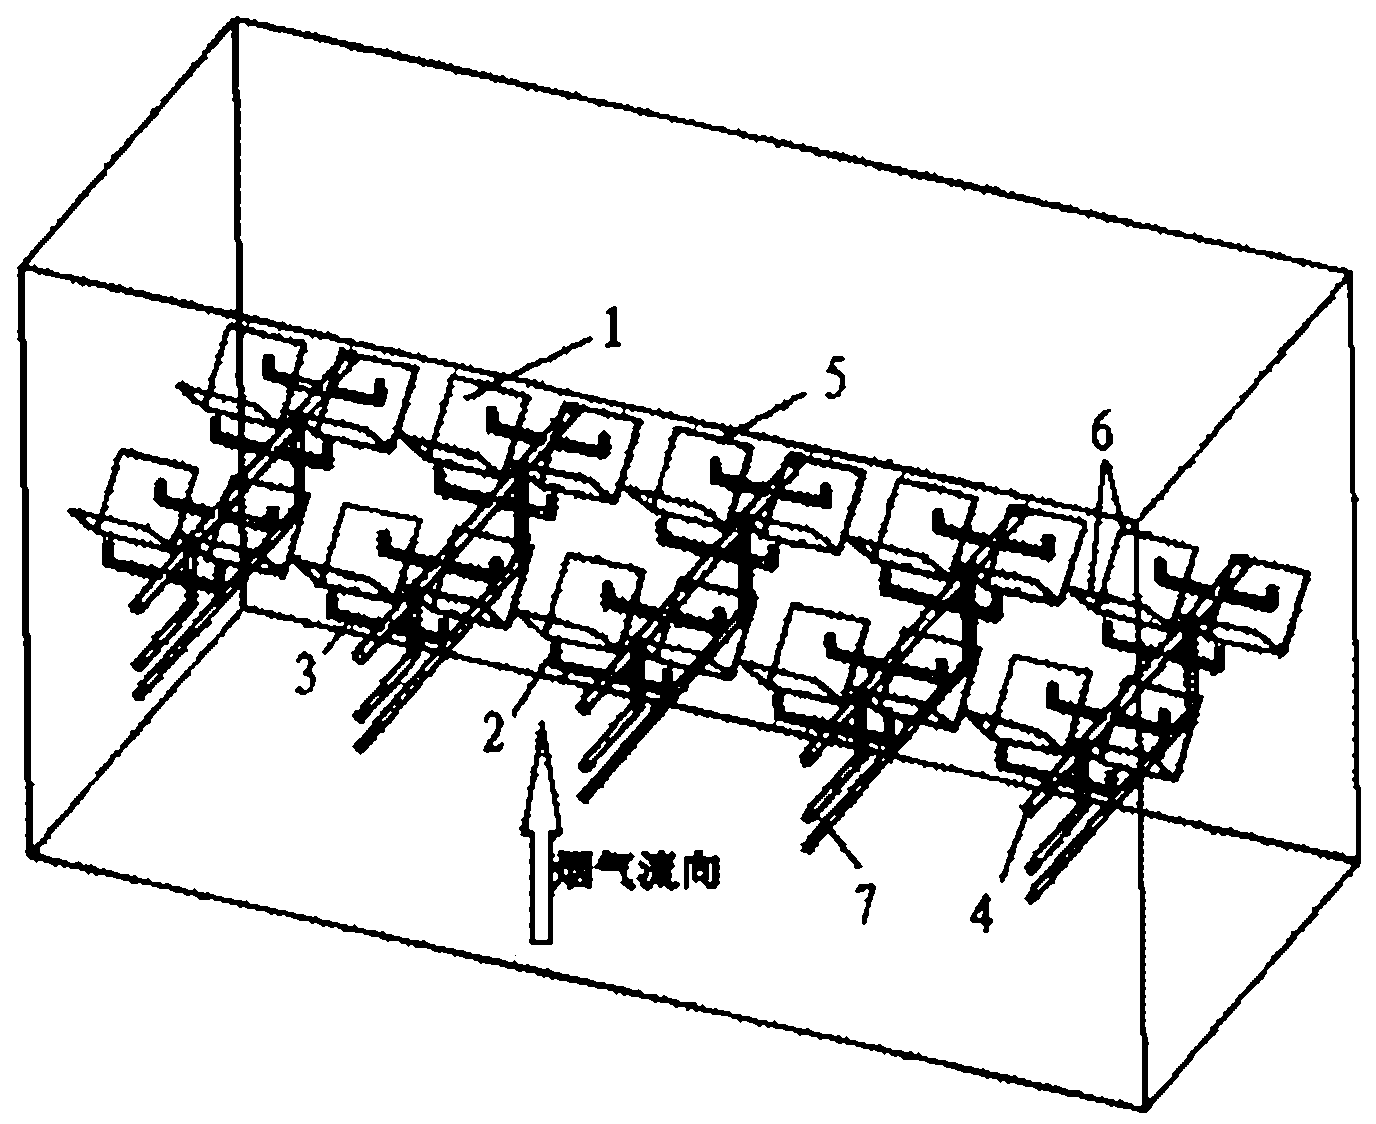 V-type ammonia spraying and mixing system for SCR (Selective Catalytic Reduction) smoke denitrification device